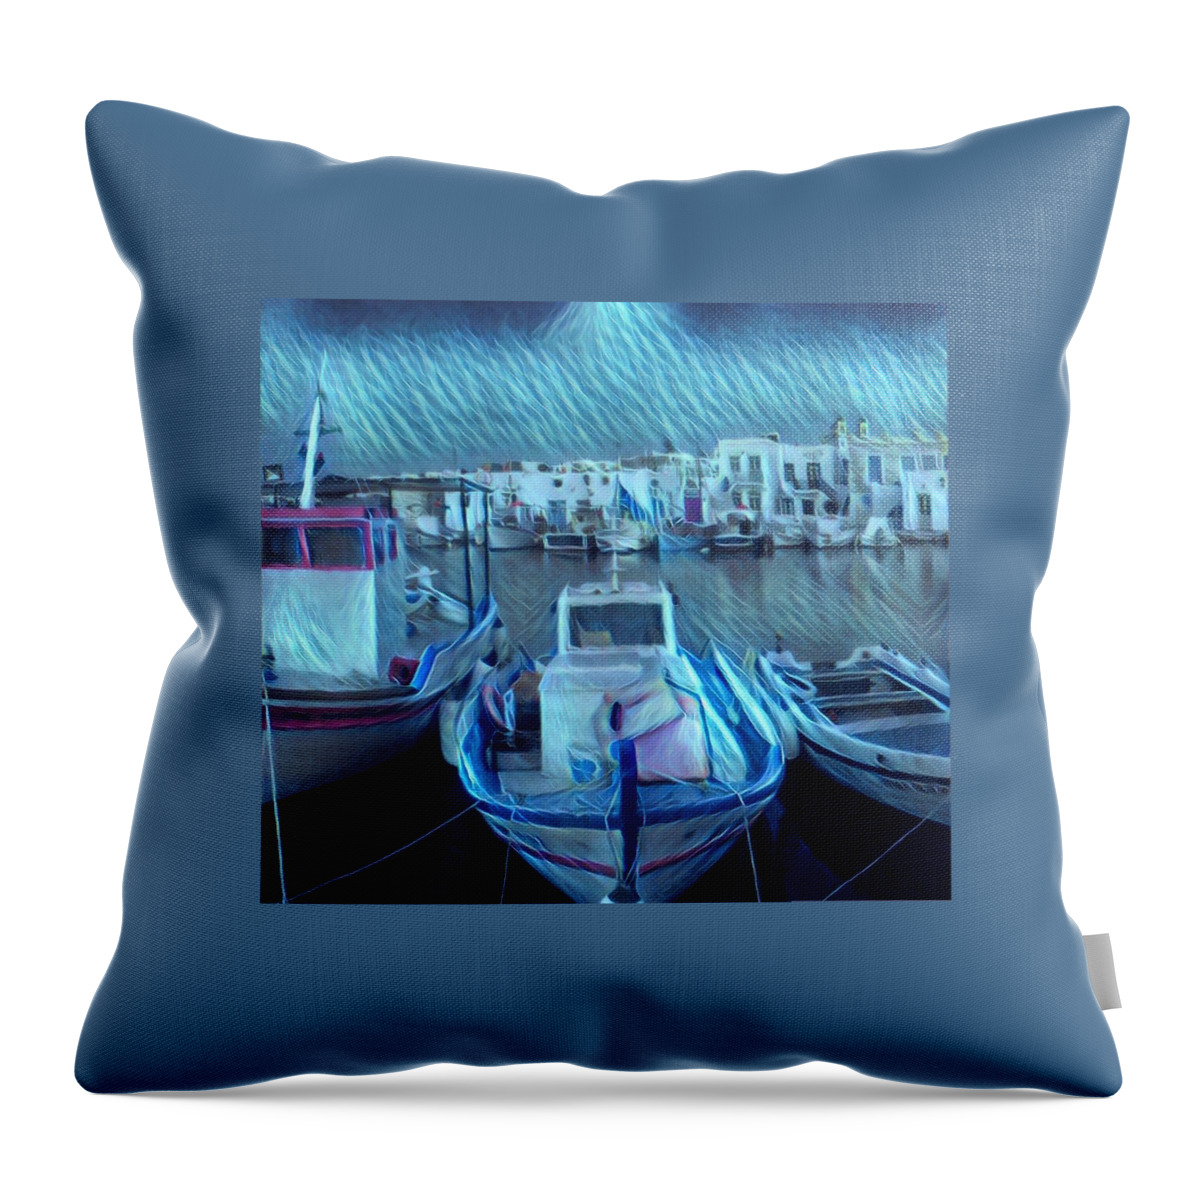 Colette Throw Pillow featuring the photograph Greek Island House by Colette V Hera Guggenheim